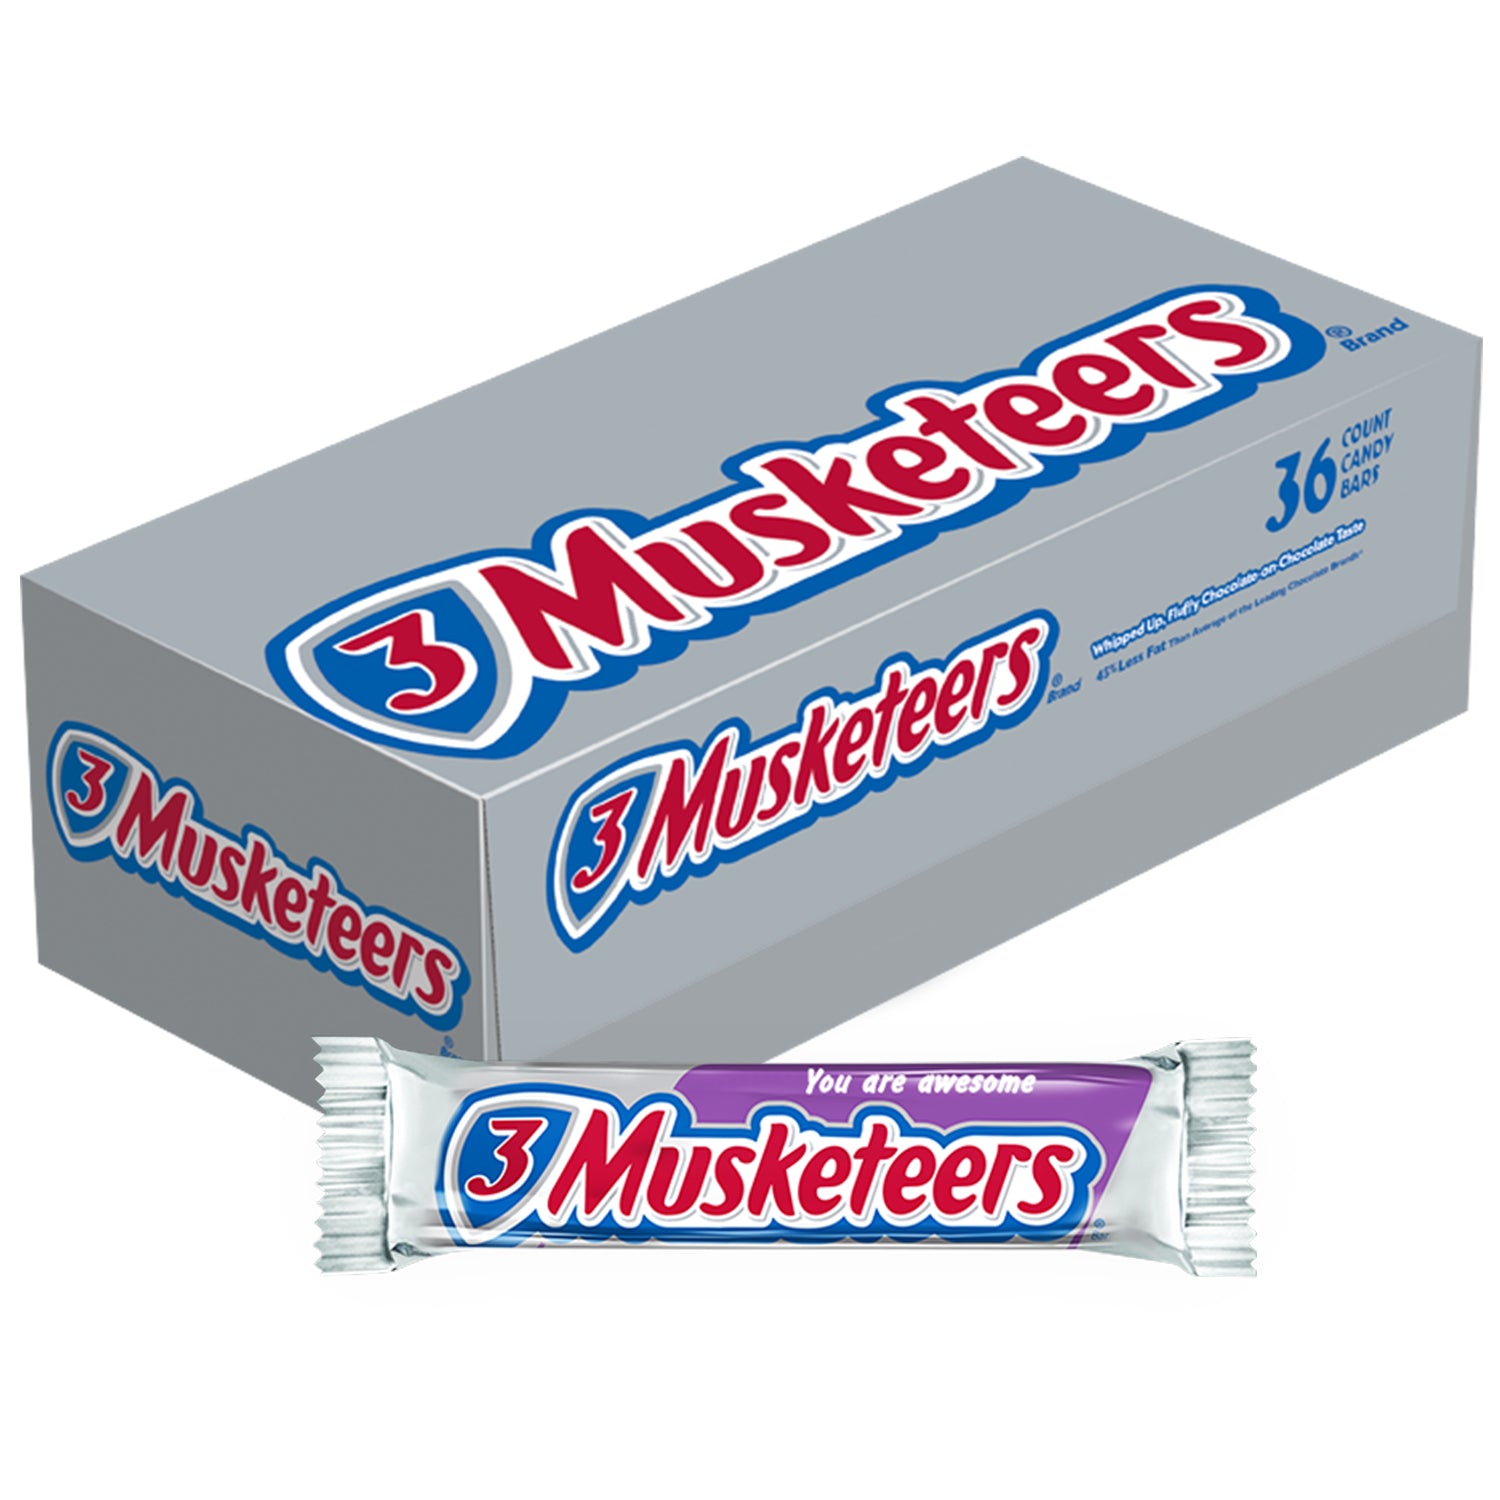 3 MUSKETEERS SINGLES 1.92 OUNCE 36 COUNT 10/CASE